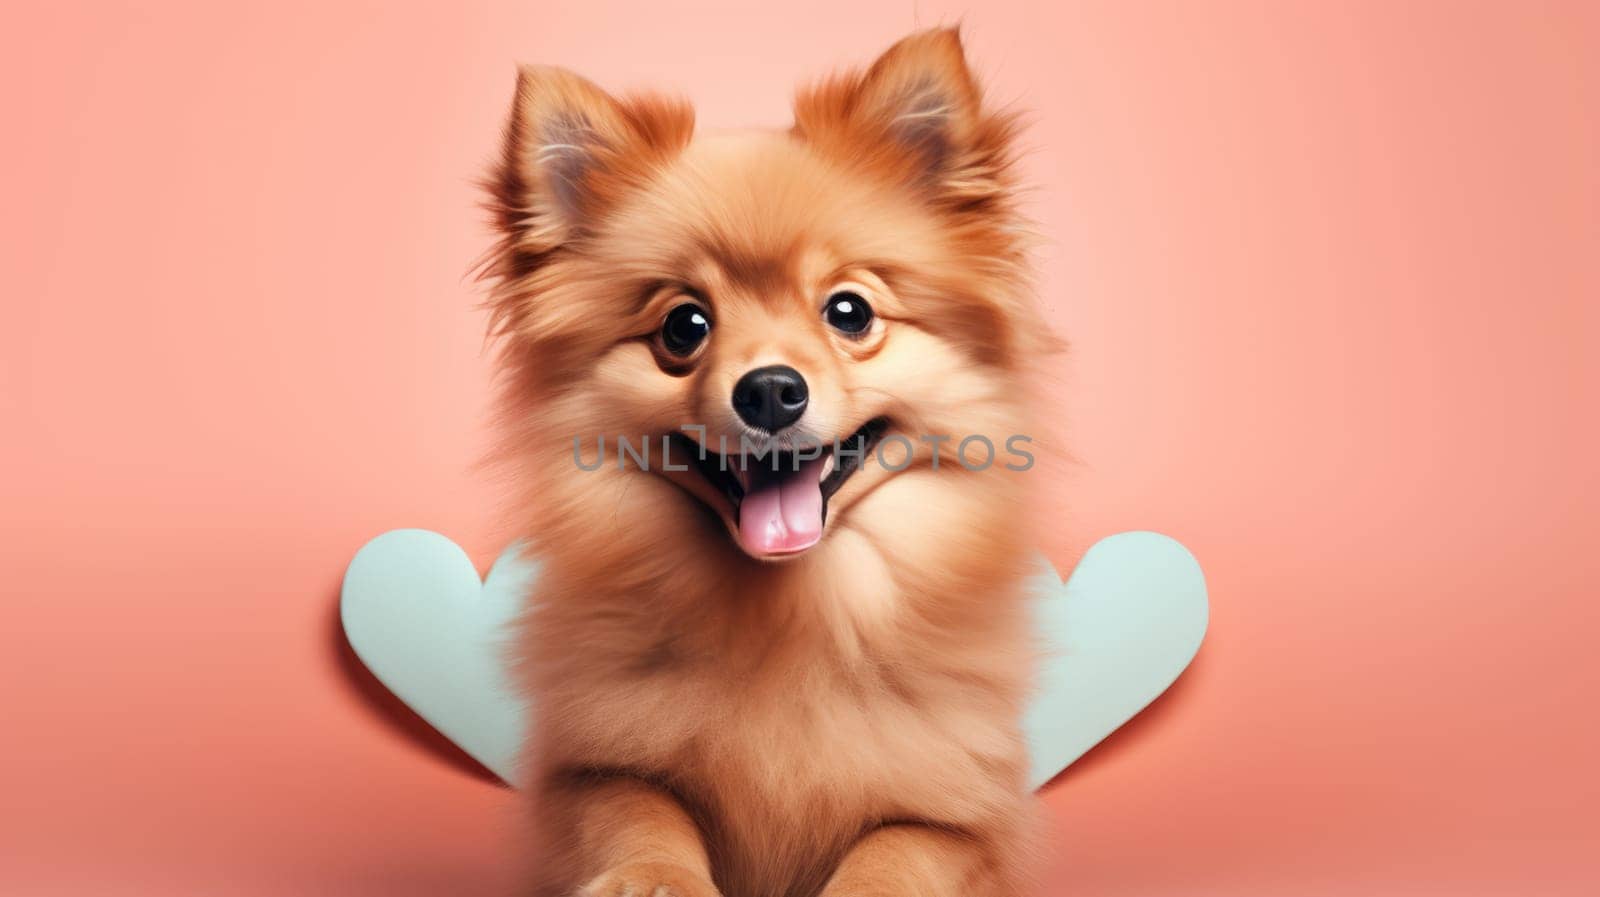 Happy cute small dog with hearts on pink background celebrating Valentine day. Valentine's day, birthday, mother's, women's day, holidays concept. by JuliaDorian